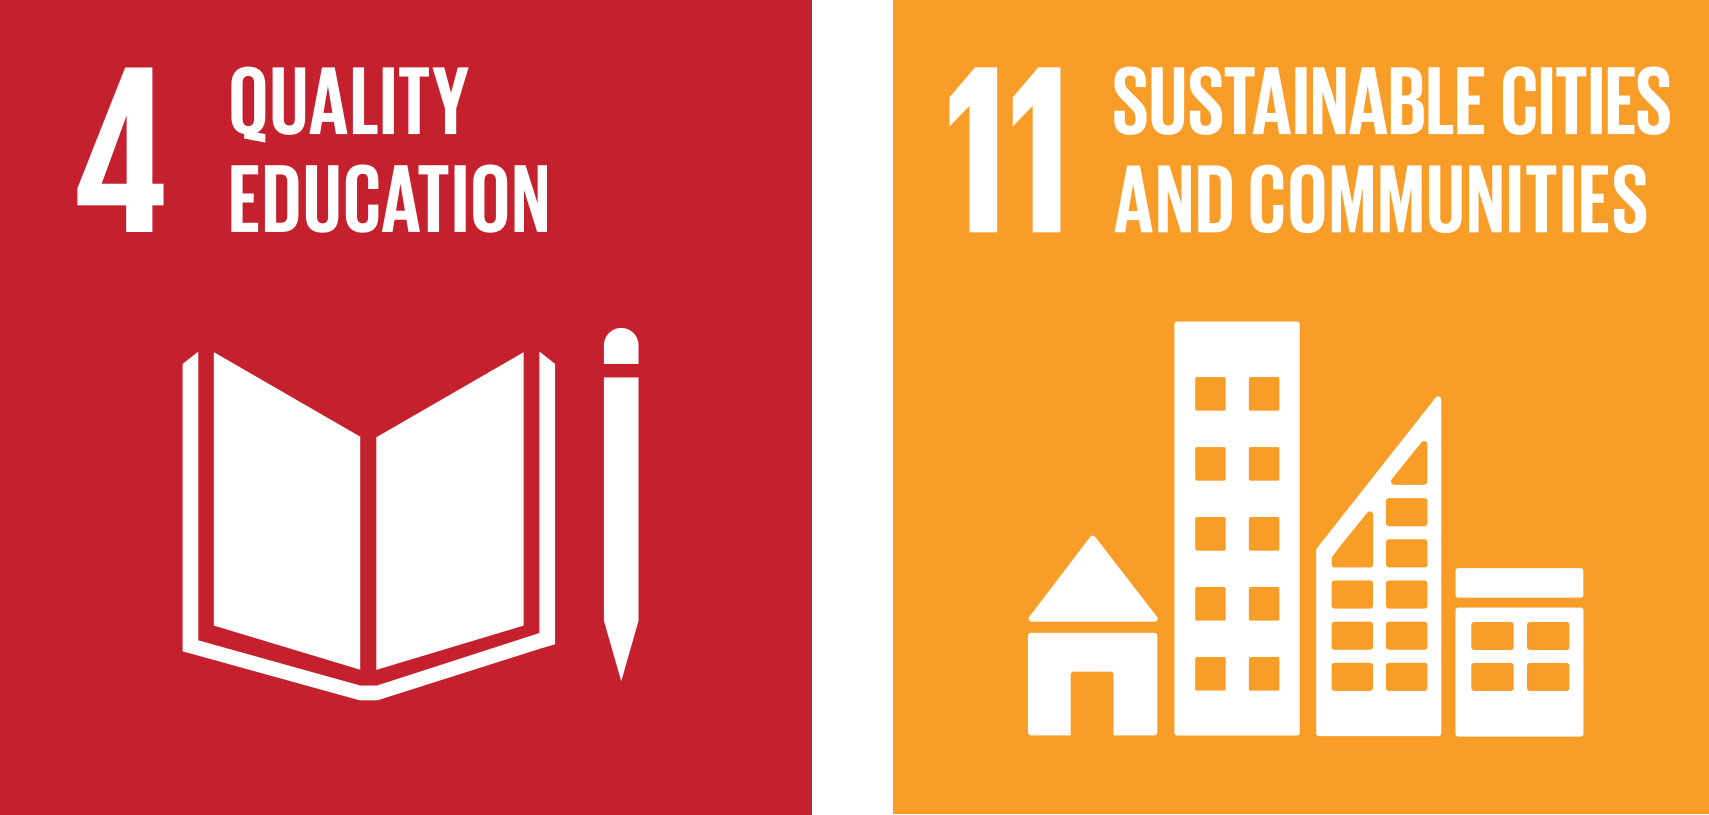 SDG Icons 4 and 11.